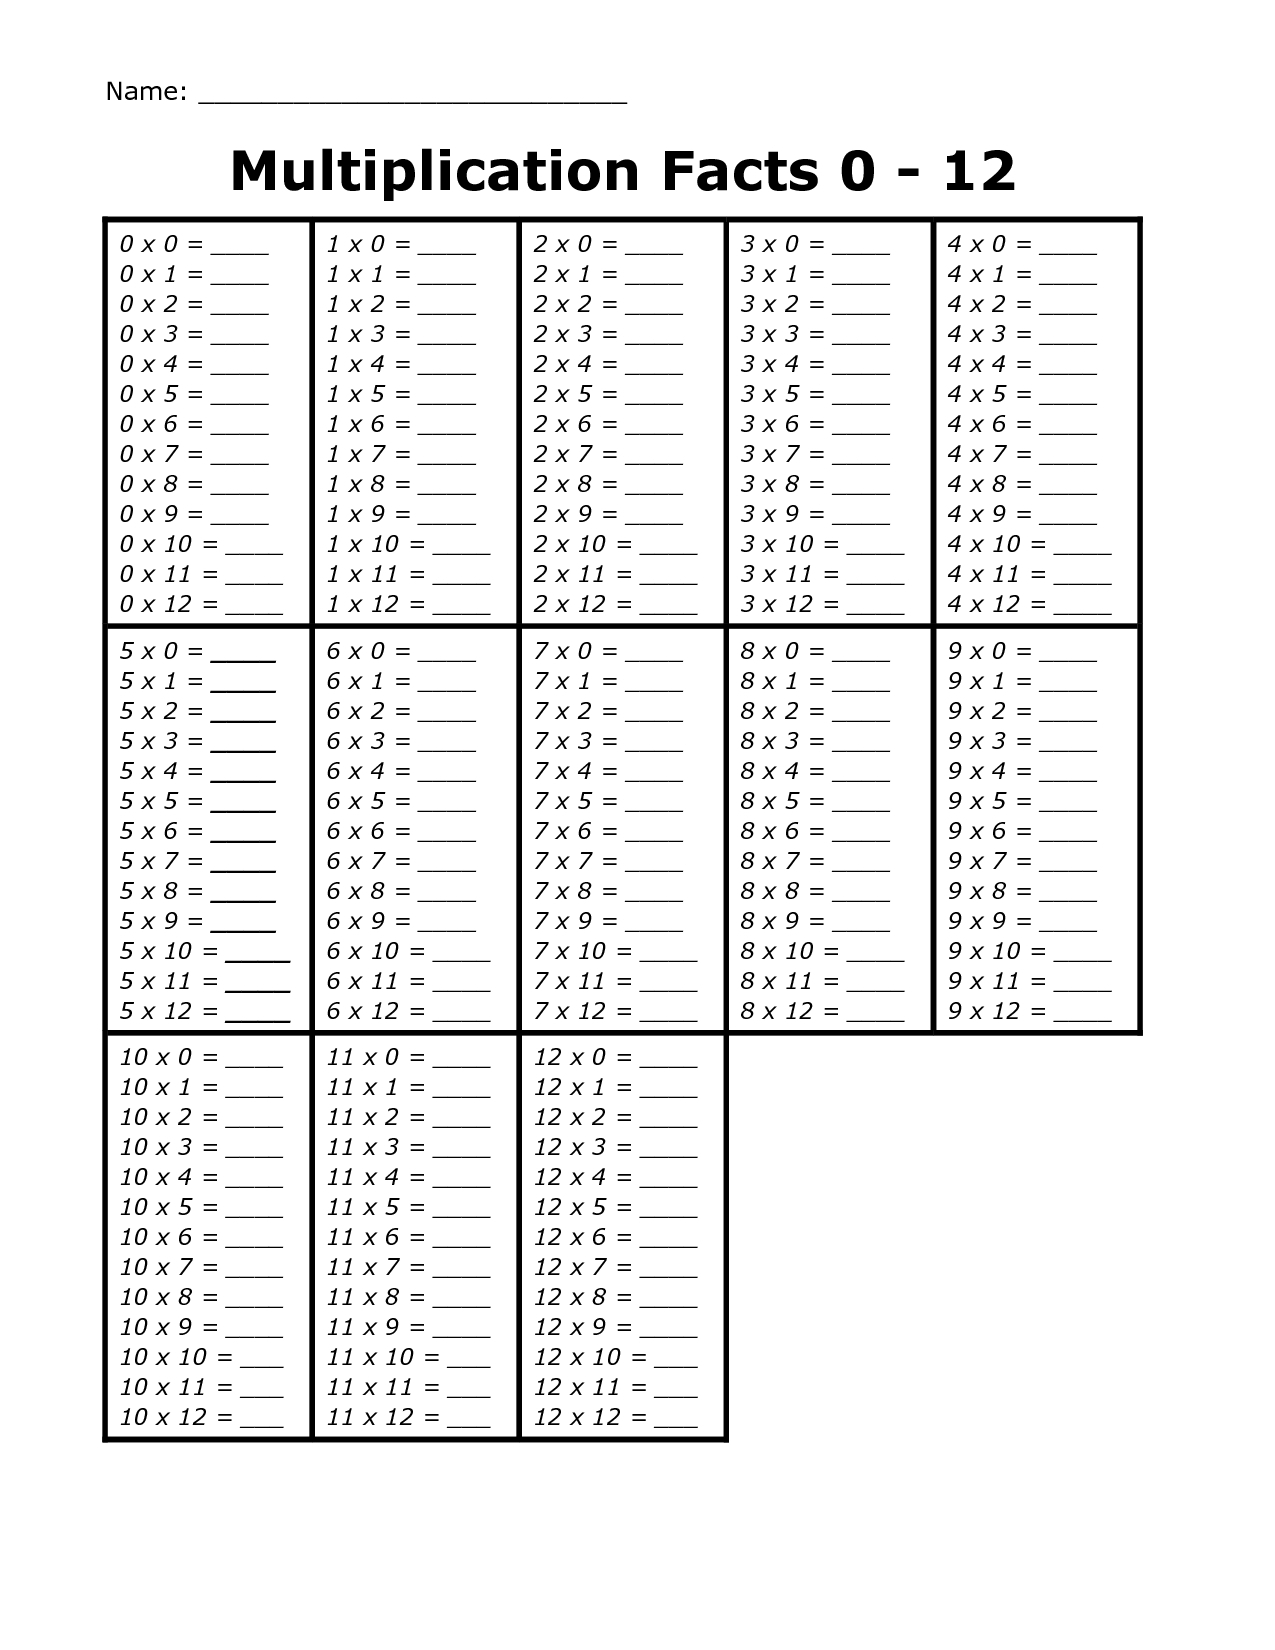 Printable Blank Multiplication Table 0-12 intended for Printable Multiplication Facts Chart